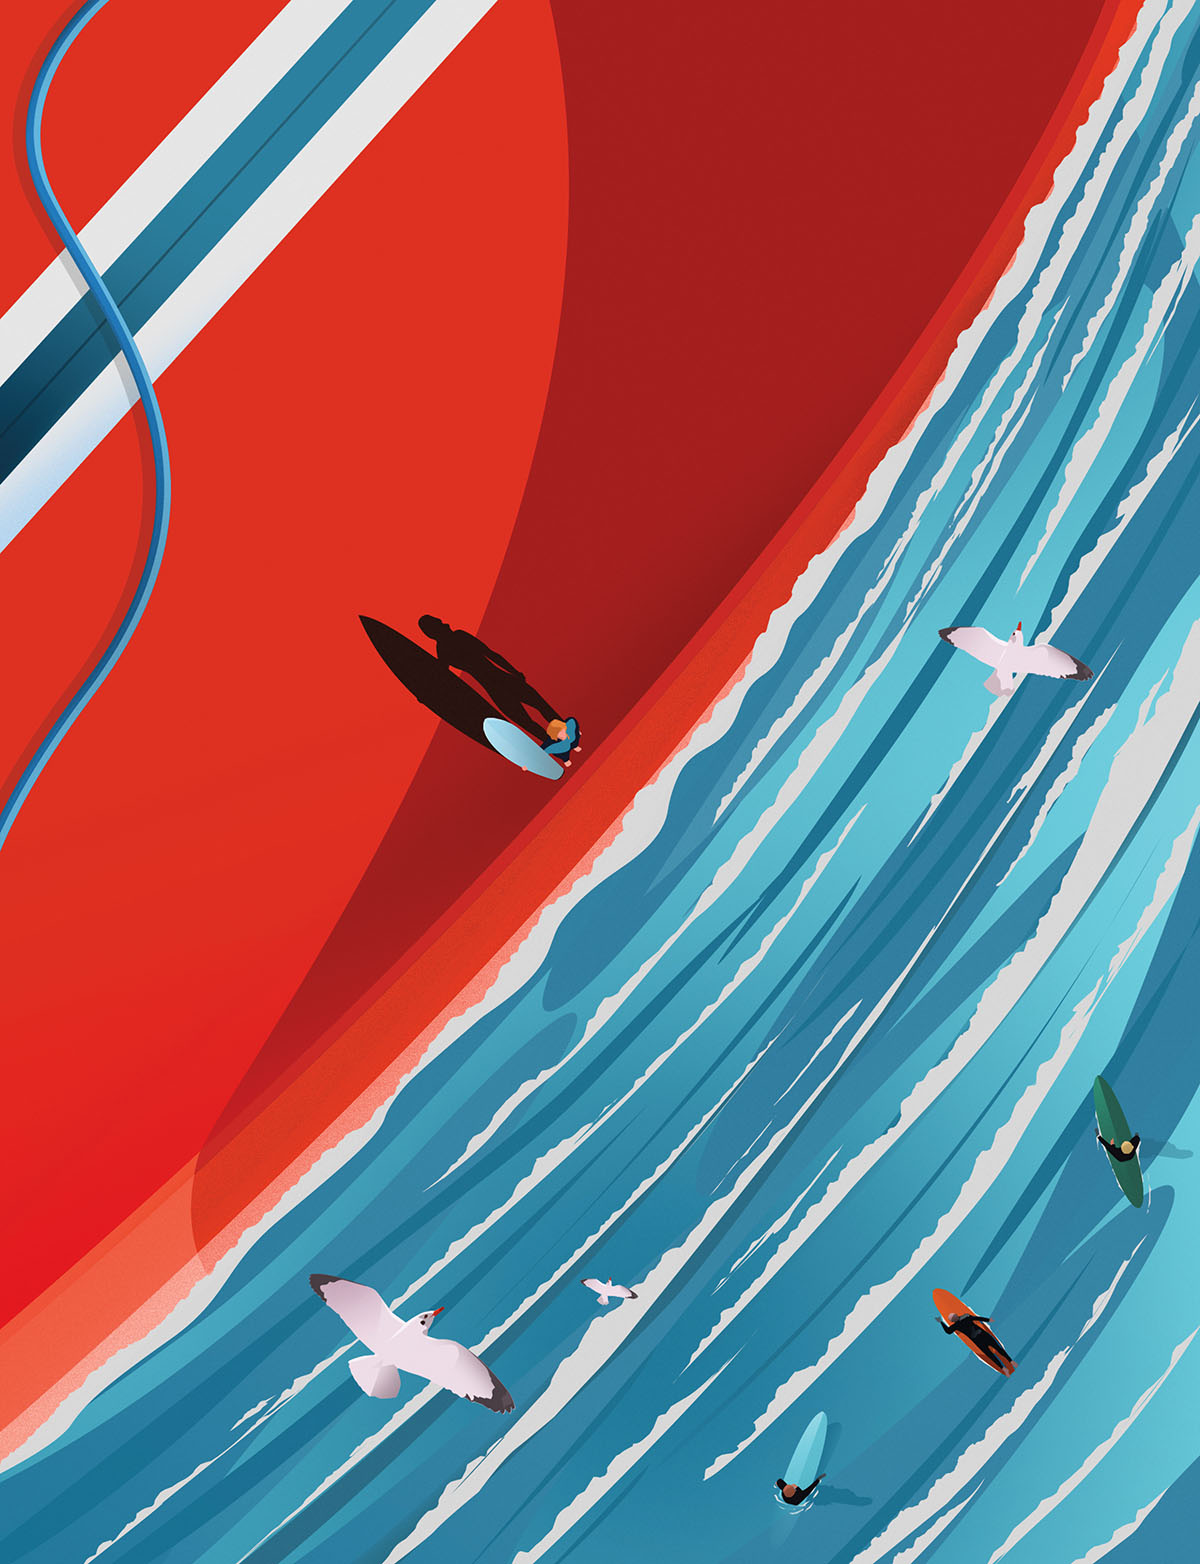 An illustration of a person on a bright red surfboard next to bright blue and white water